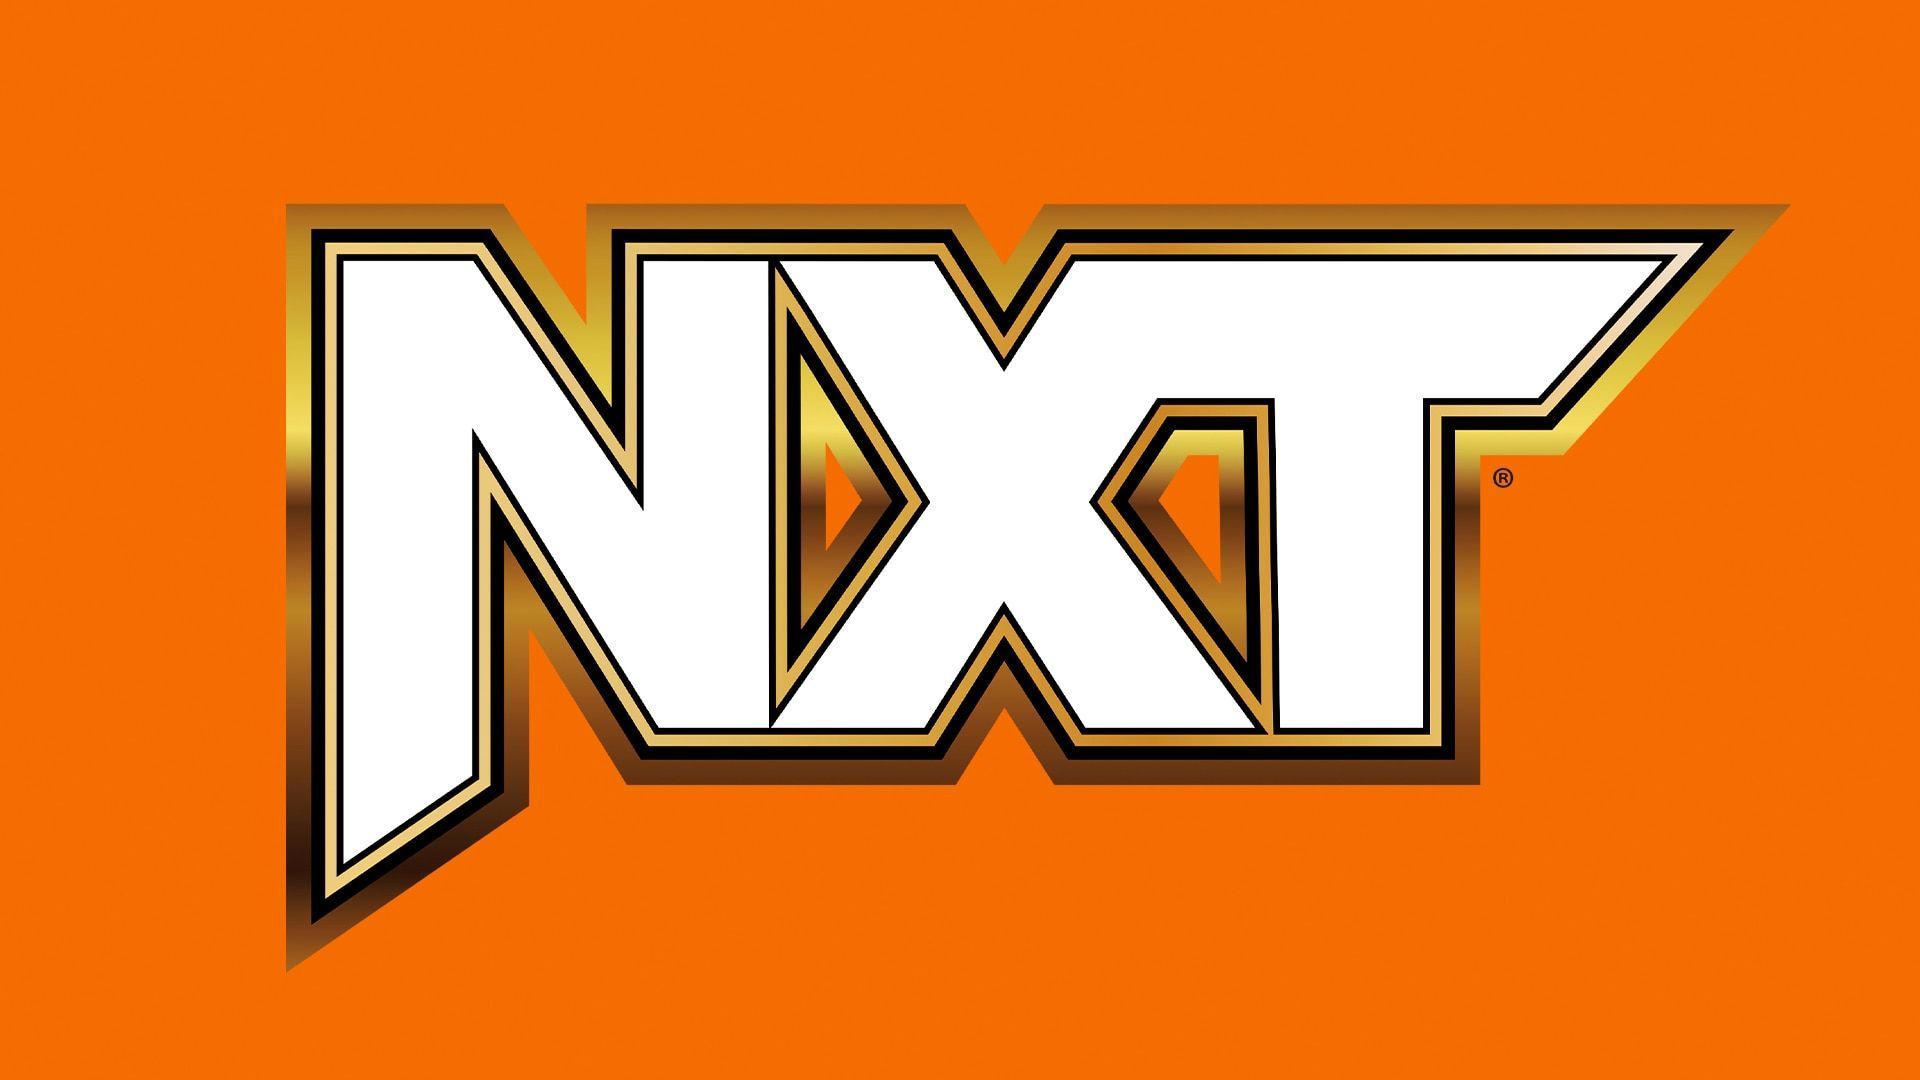 NXT is the home of the next biggest WWE superstars.